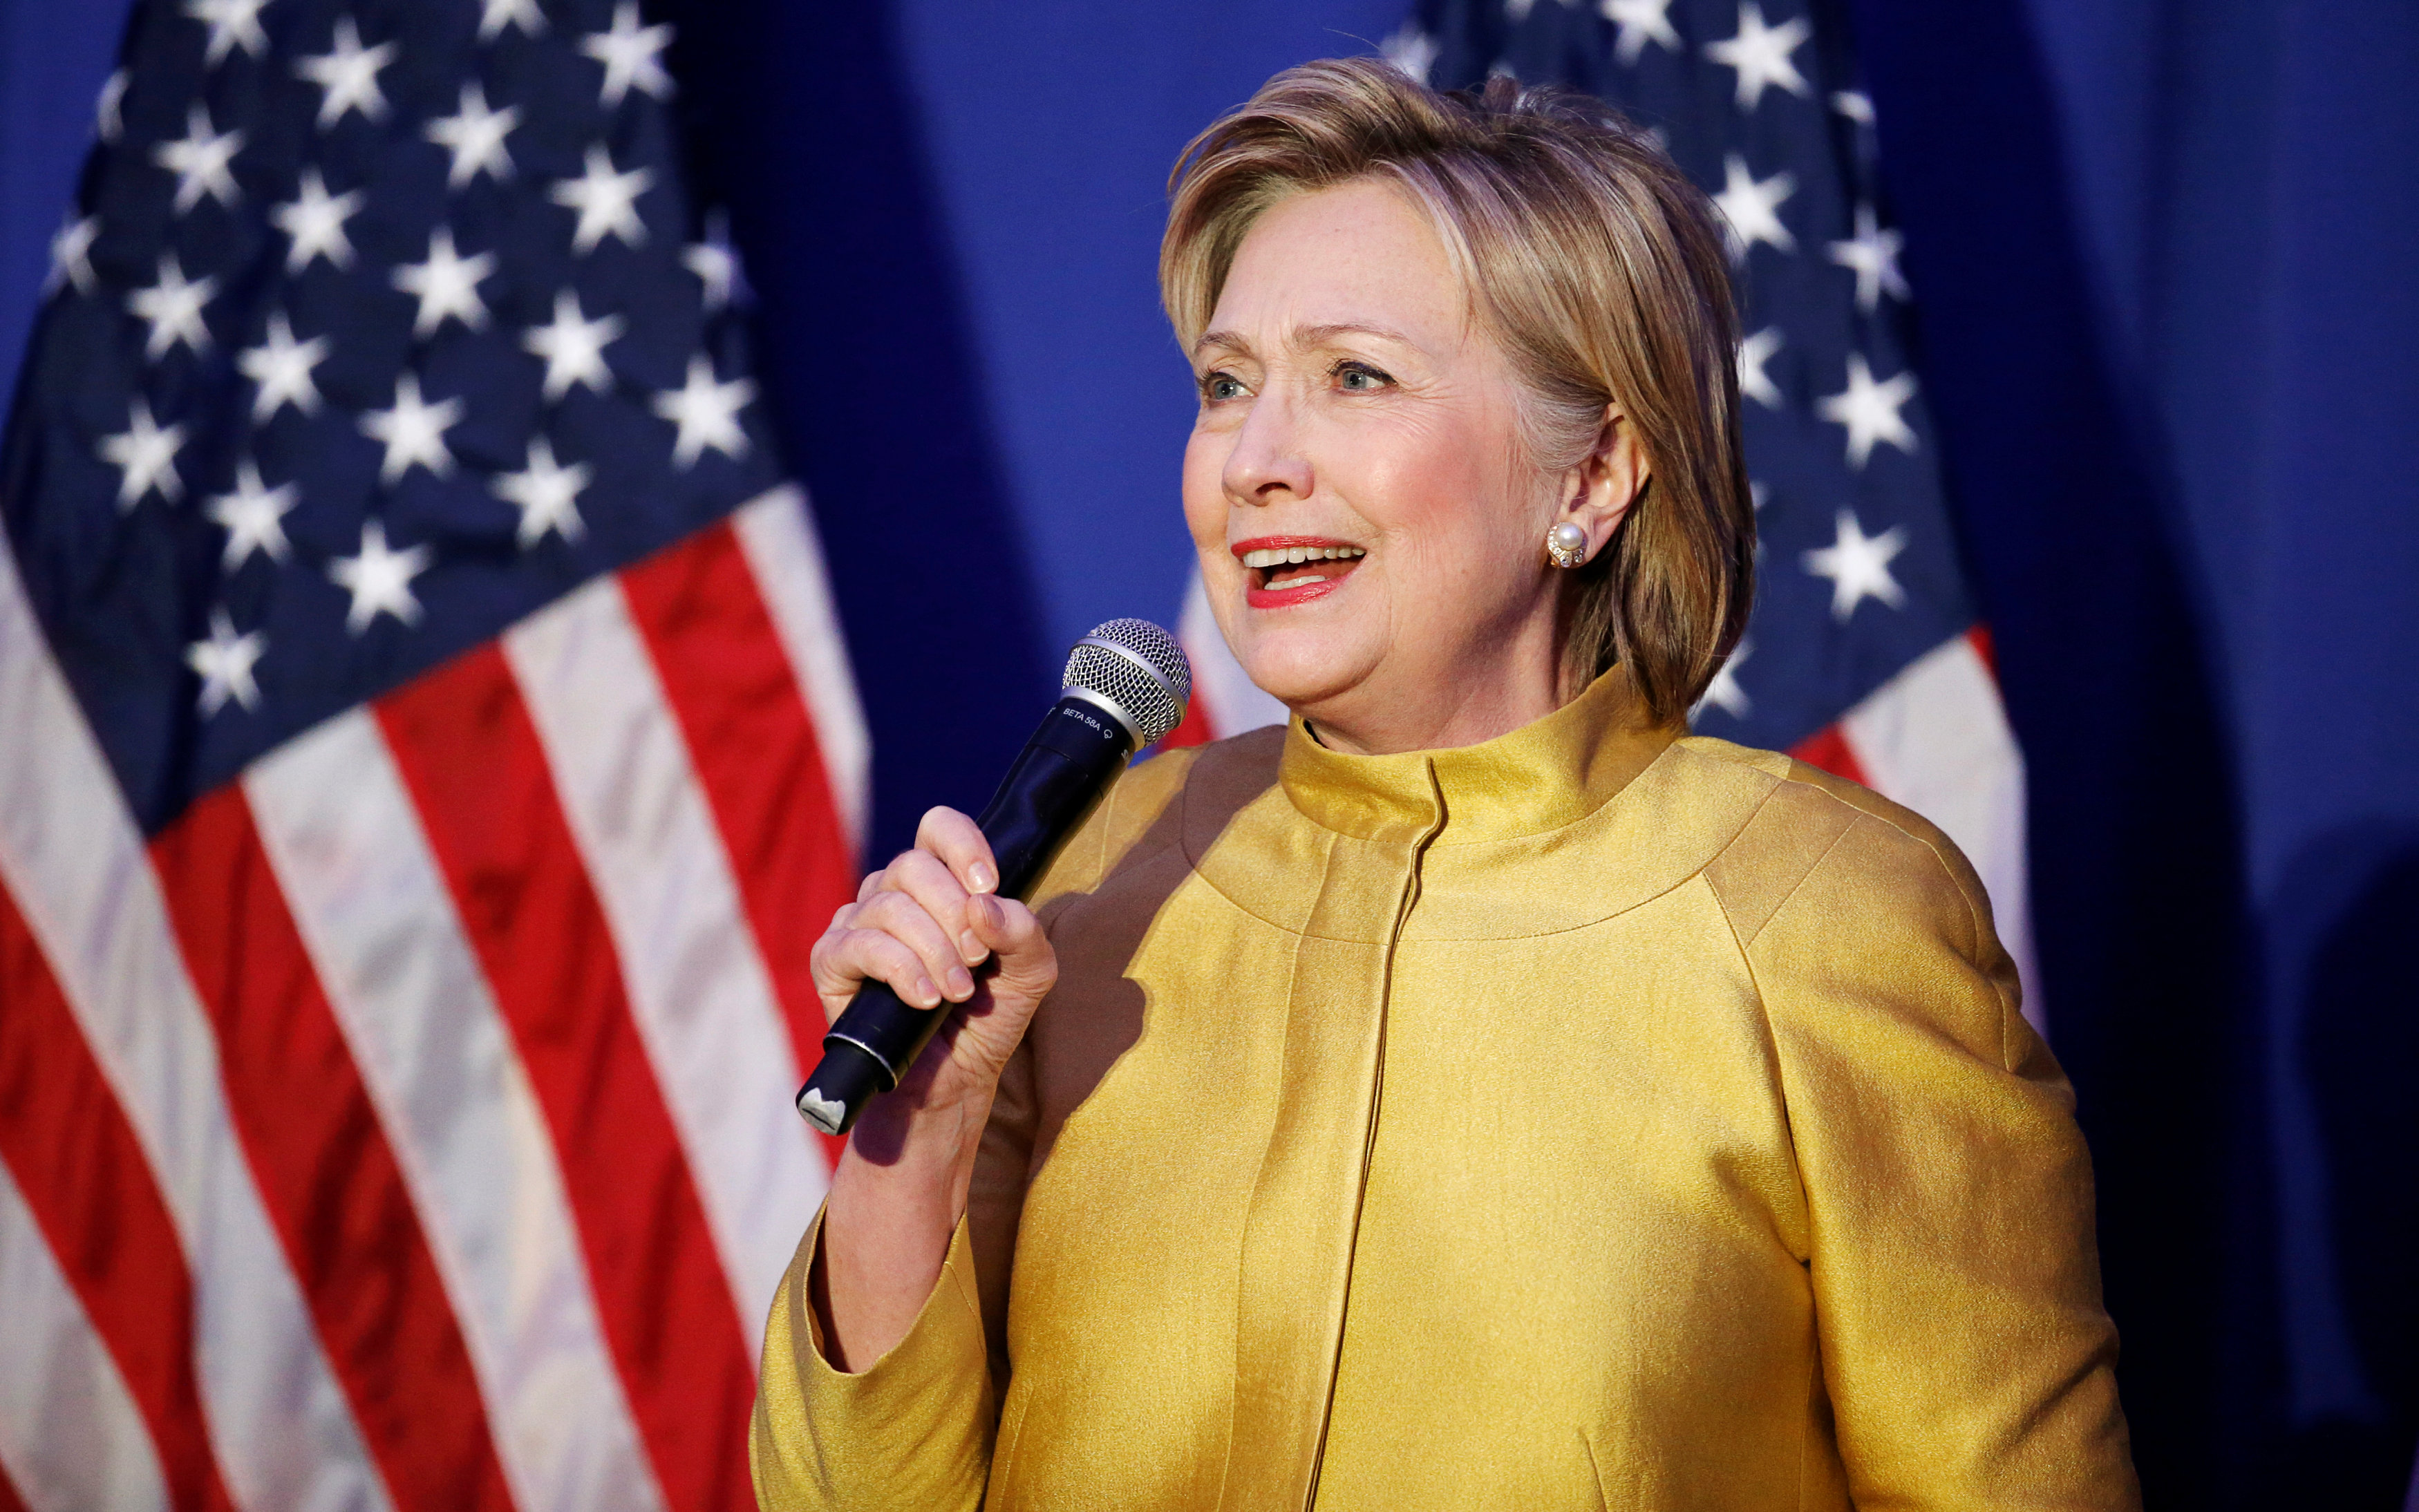 Hillary Clinton promises better representation for Asian-Americans